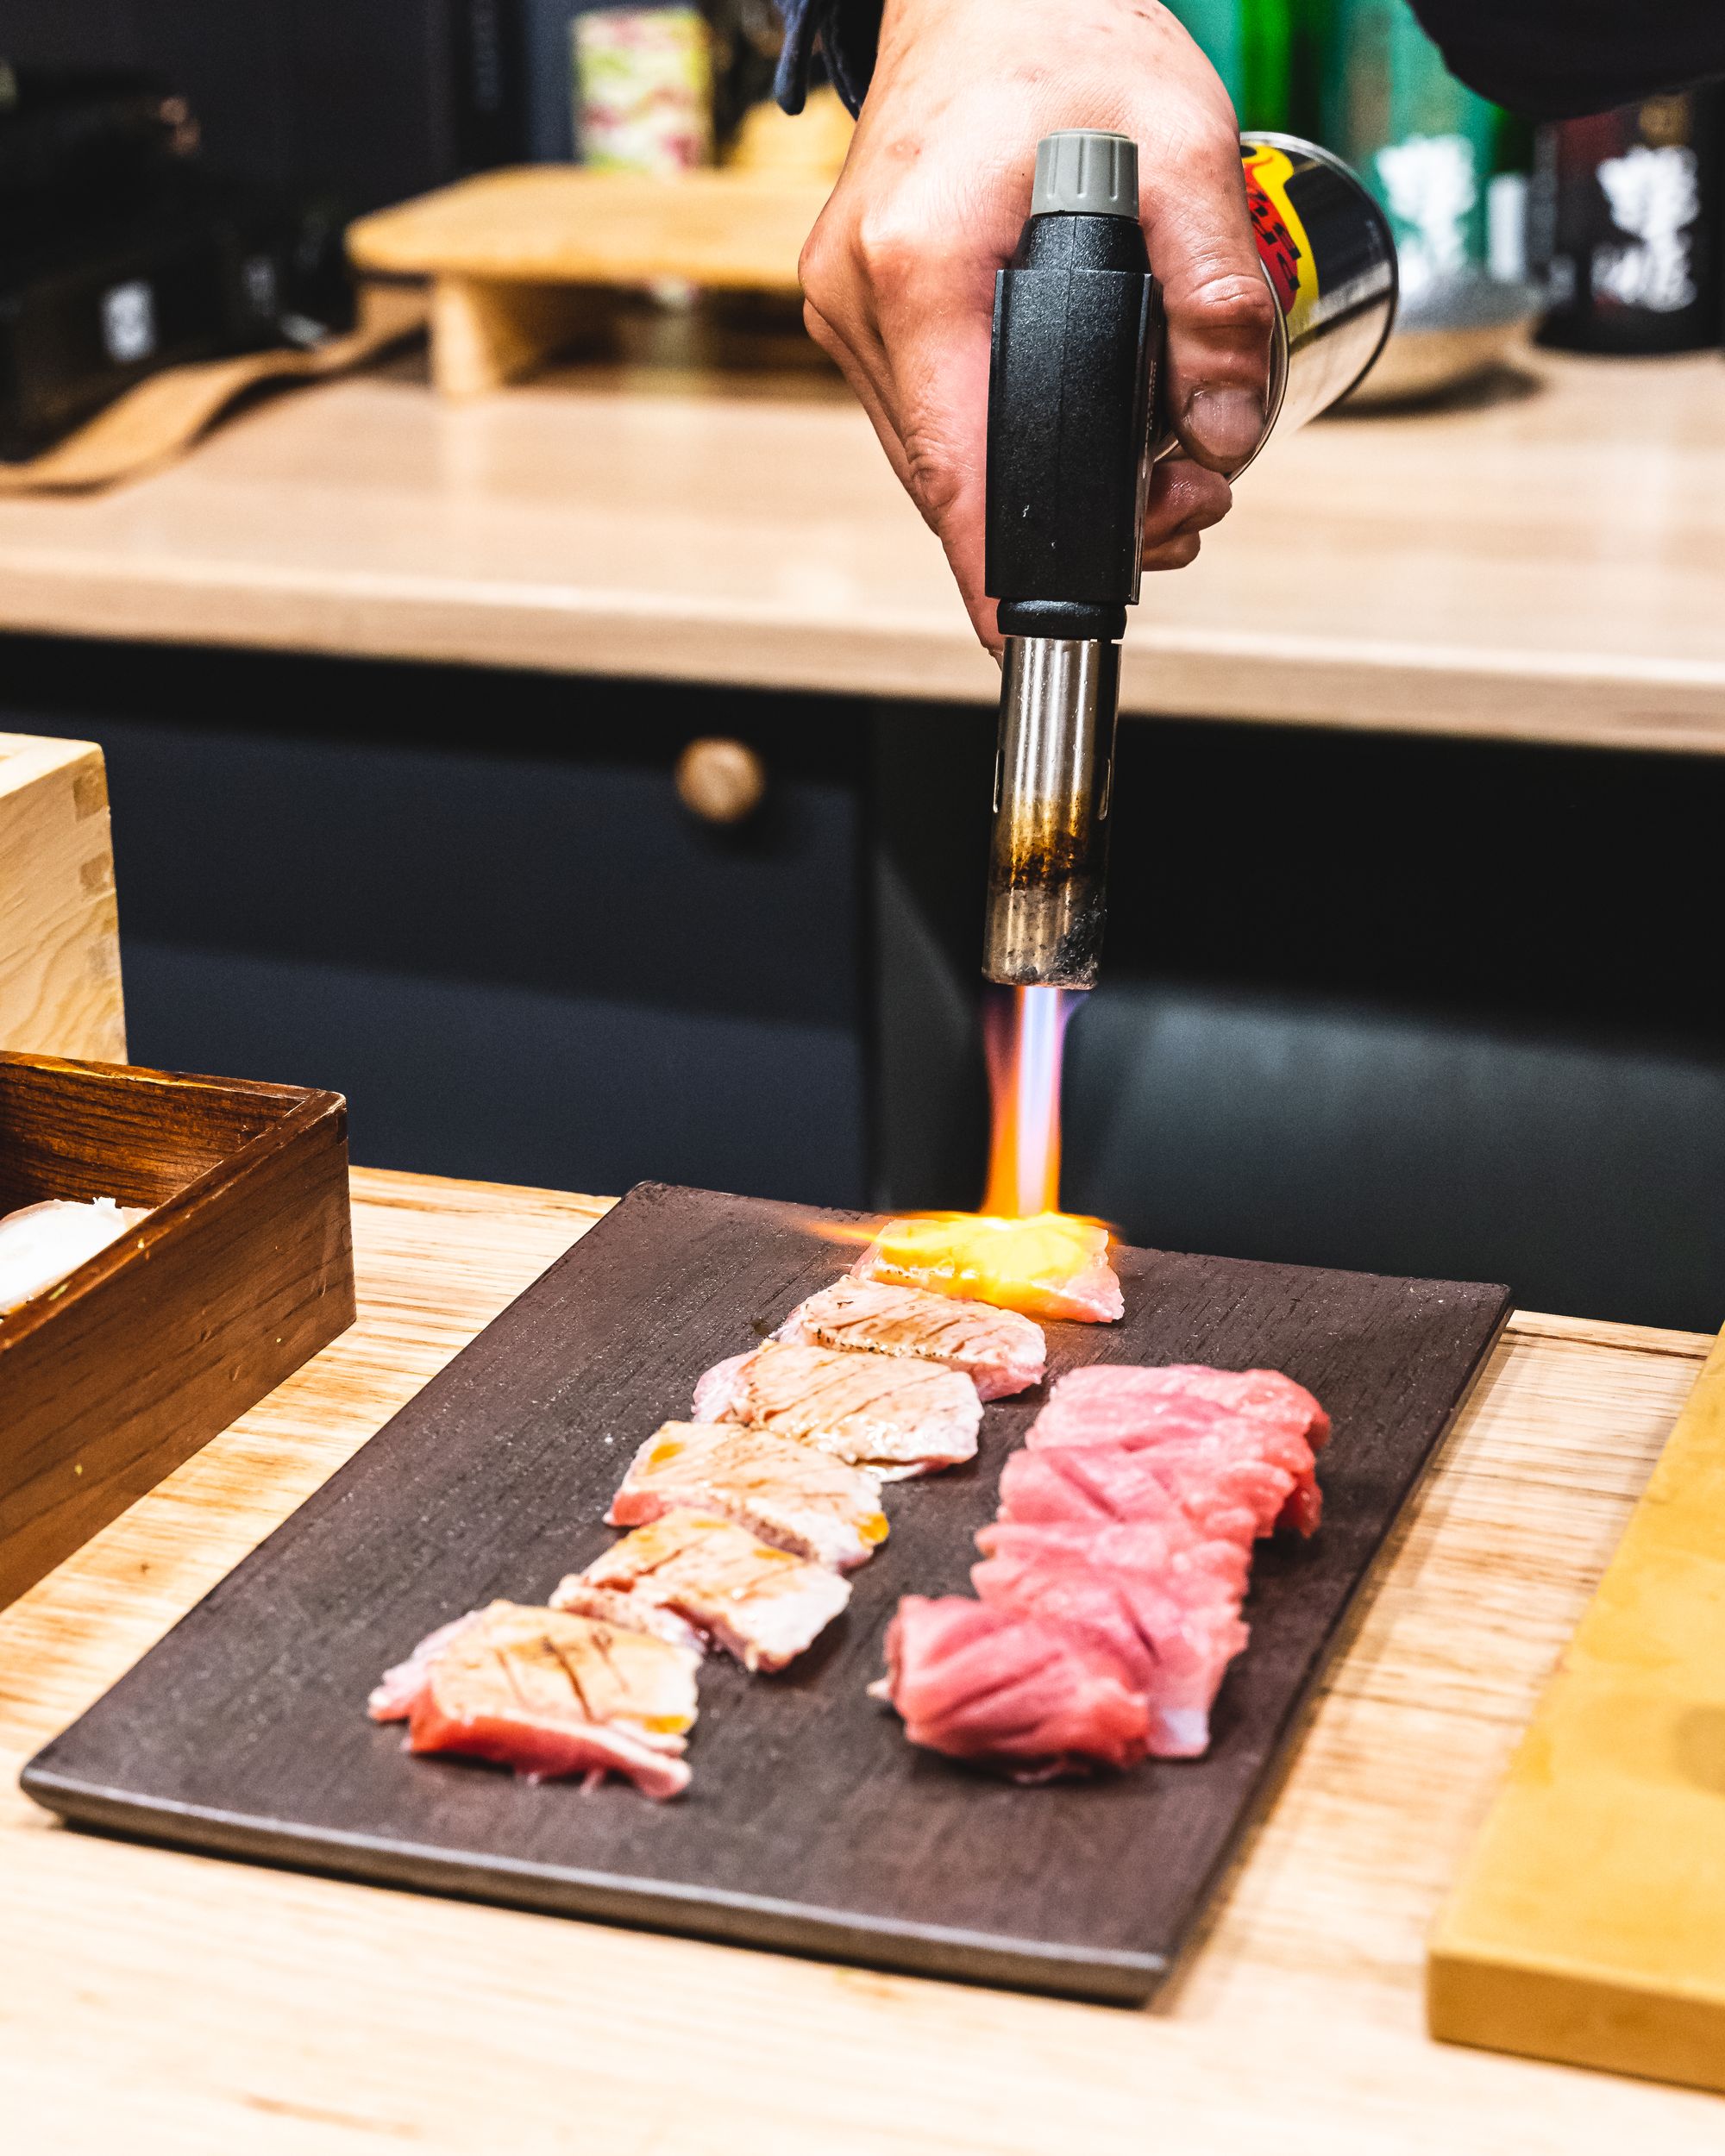 Blow-torch searing the wagyu